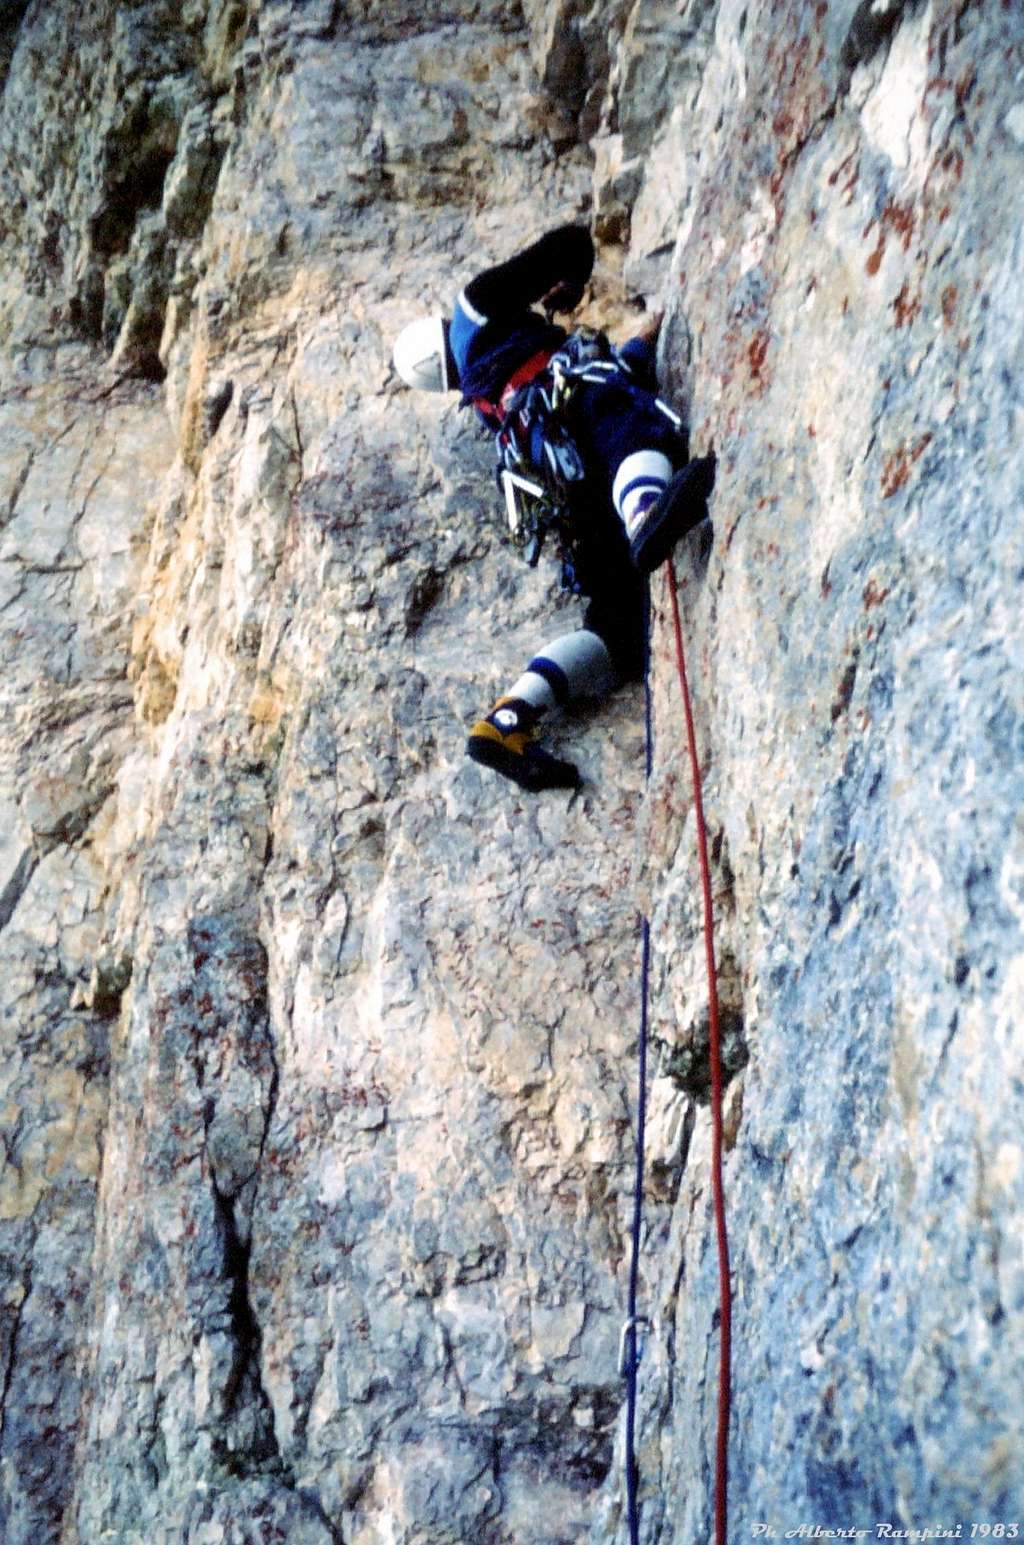 Climbing Carlesso-Menti route on Torre di Valgrande NW face, 1983